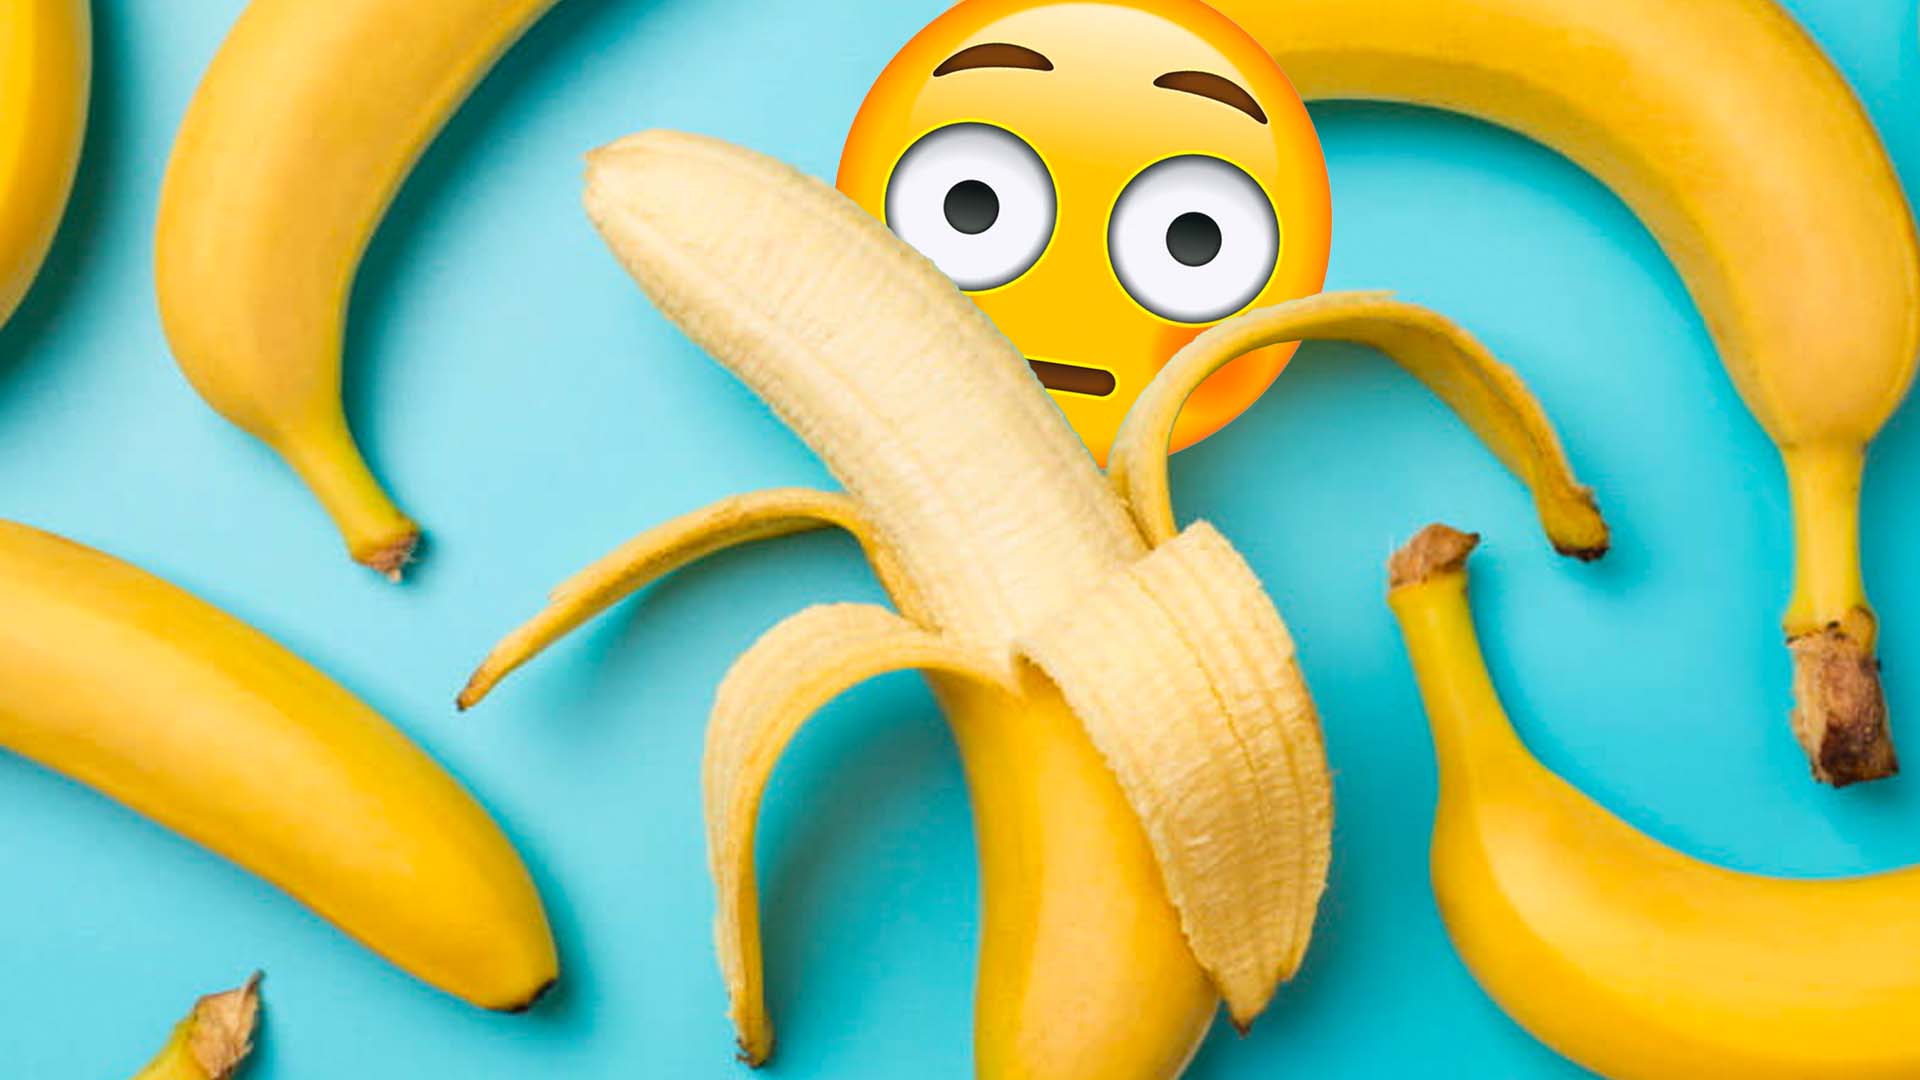 ONE TYPE OF BANANA MAY BE GOING EXTINCT DUE TO DISEASE